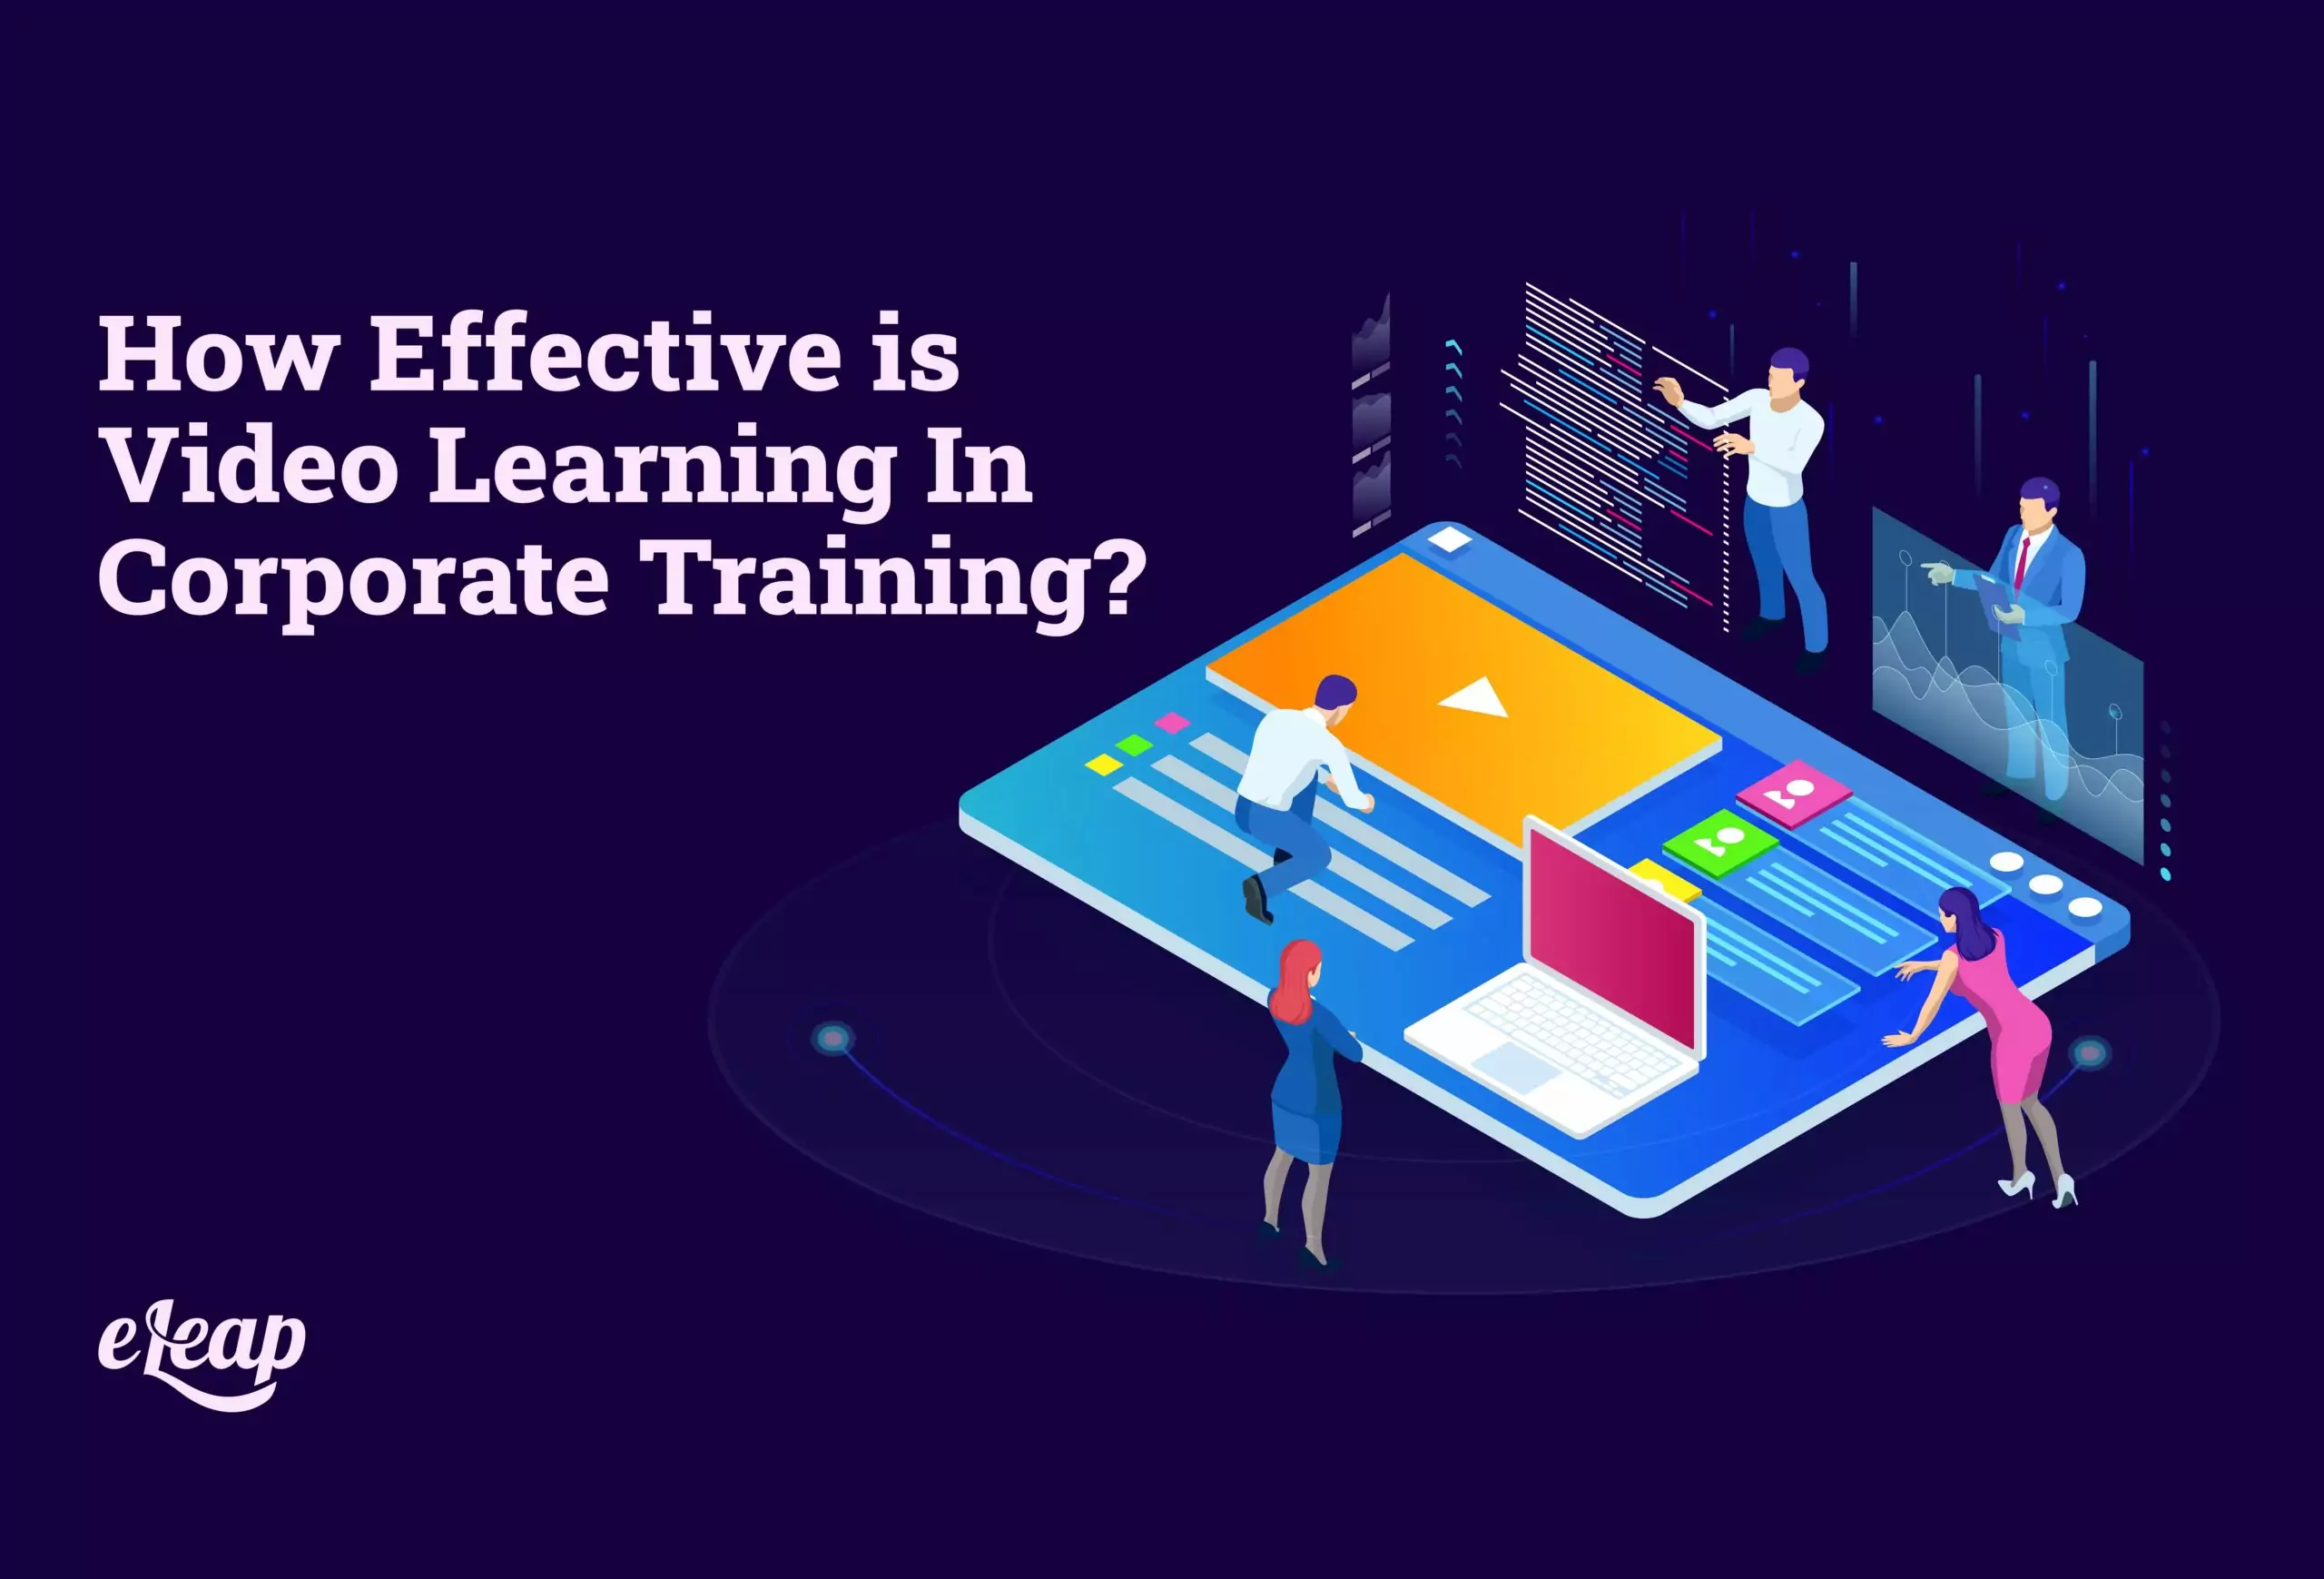 How Effective is Video Learning In Corporate Training?